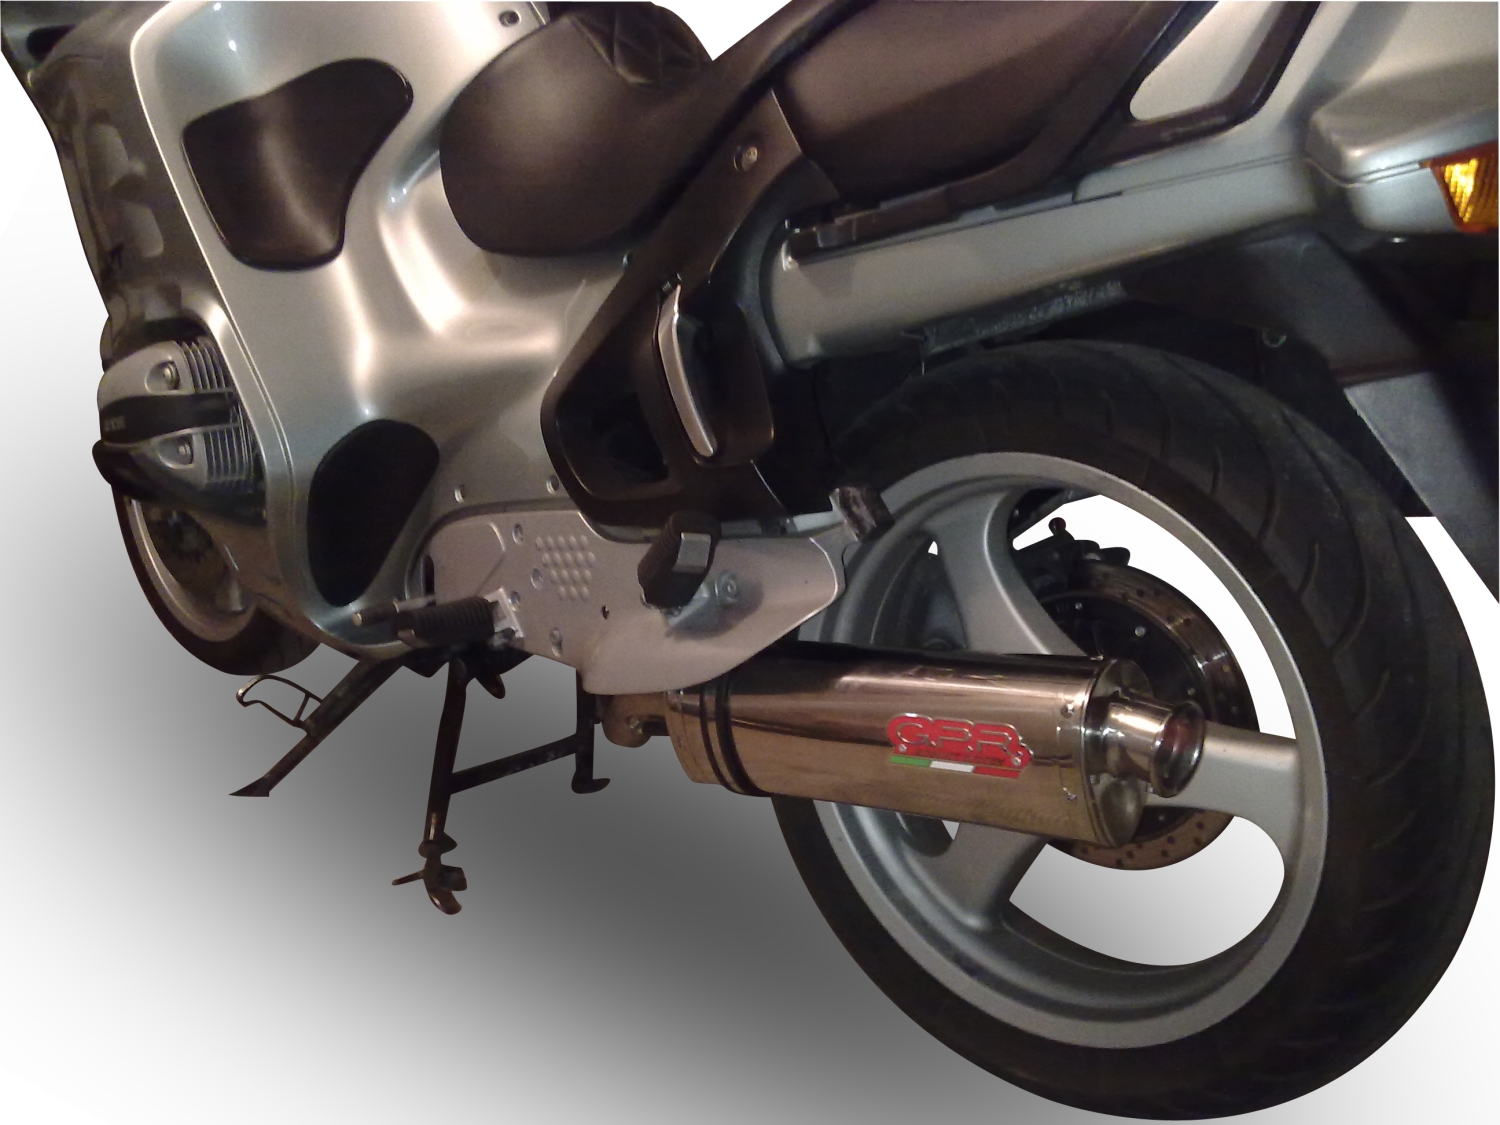 Exhaust system compatible with Bmw R 1100 R 1994-2002, Trioval, Homologated legal slip-on exhaust including removable db killer and link pipe 